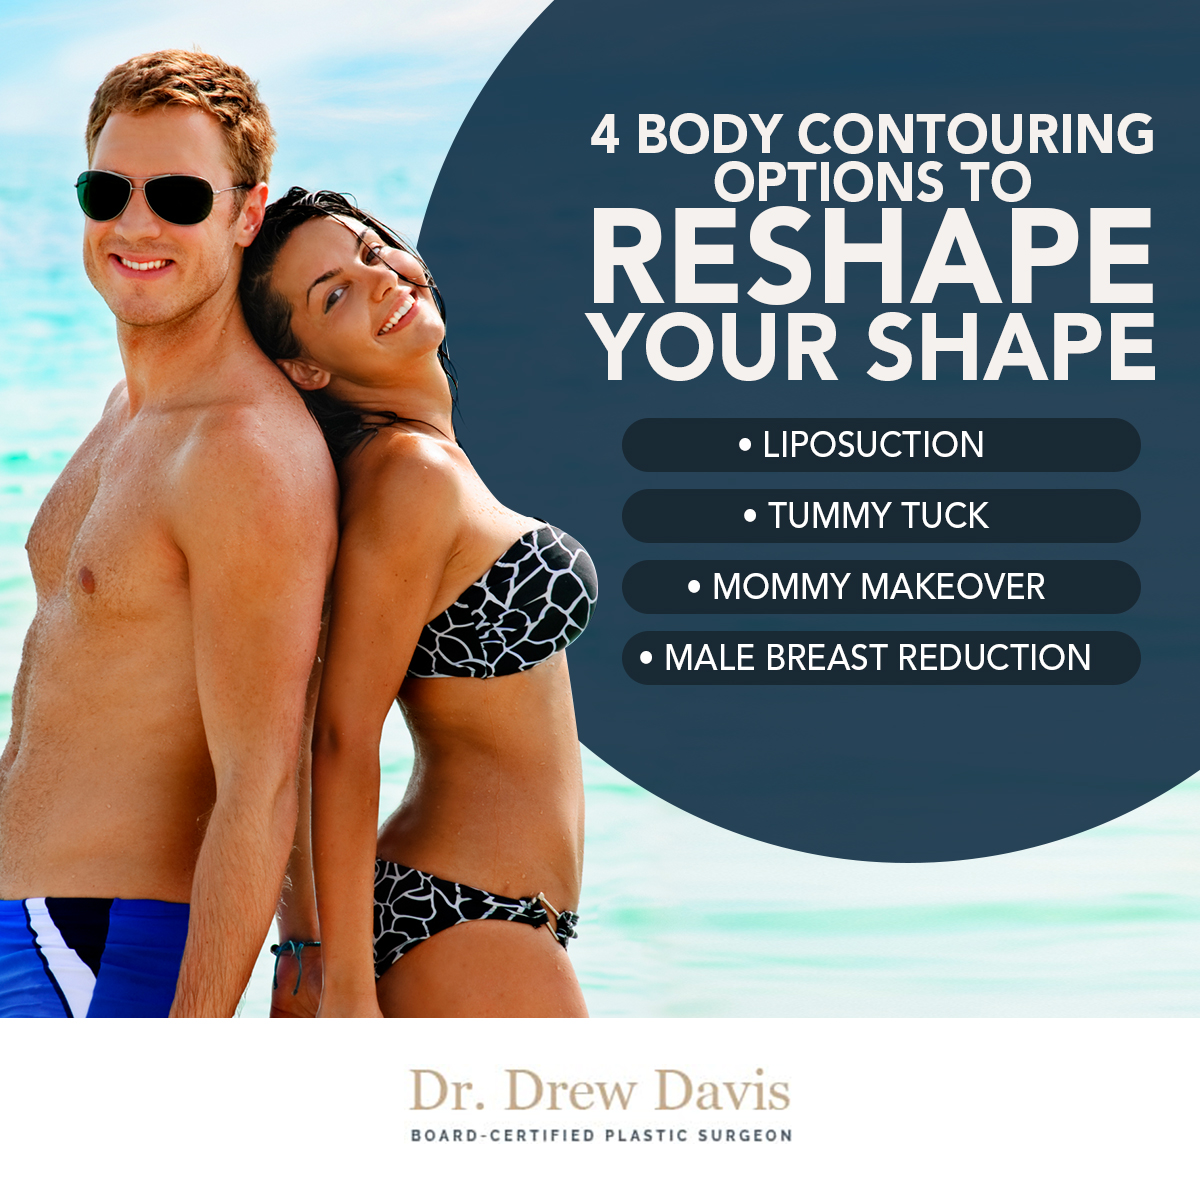 4 Body Contouring Options to Reshape Your Shape Infographic